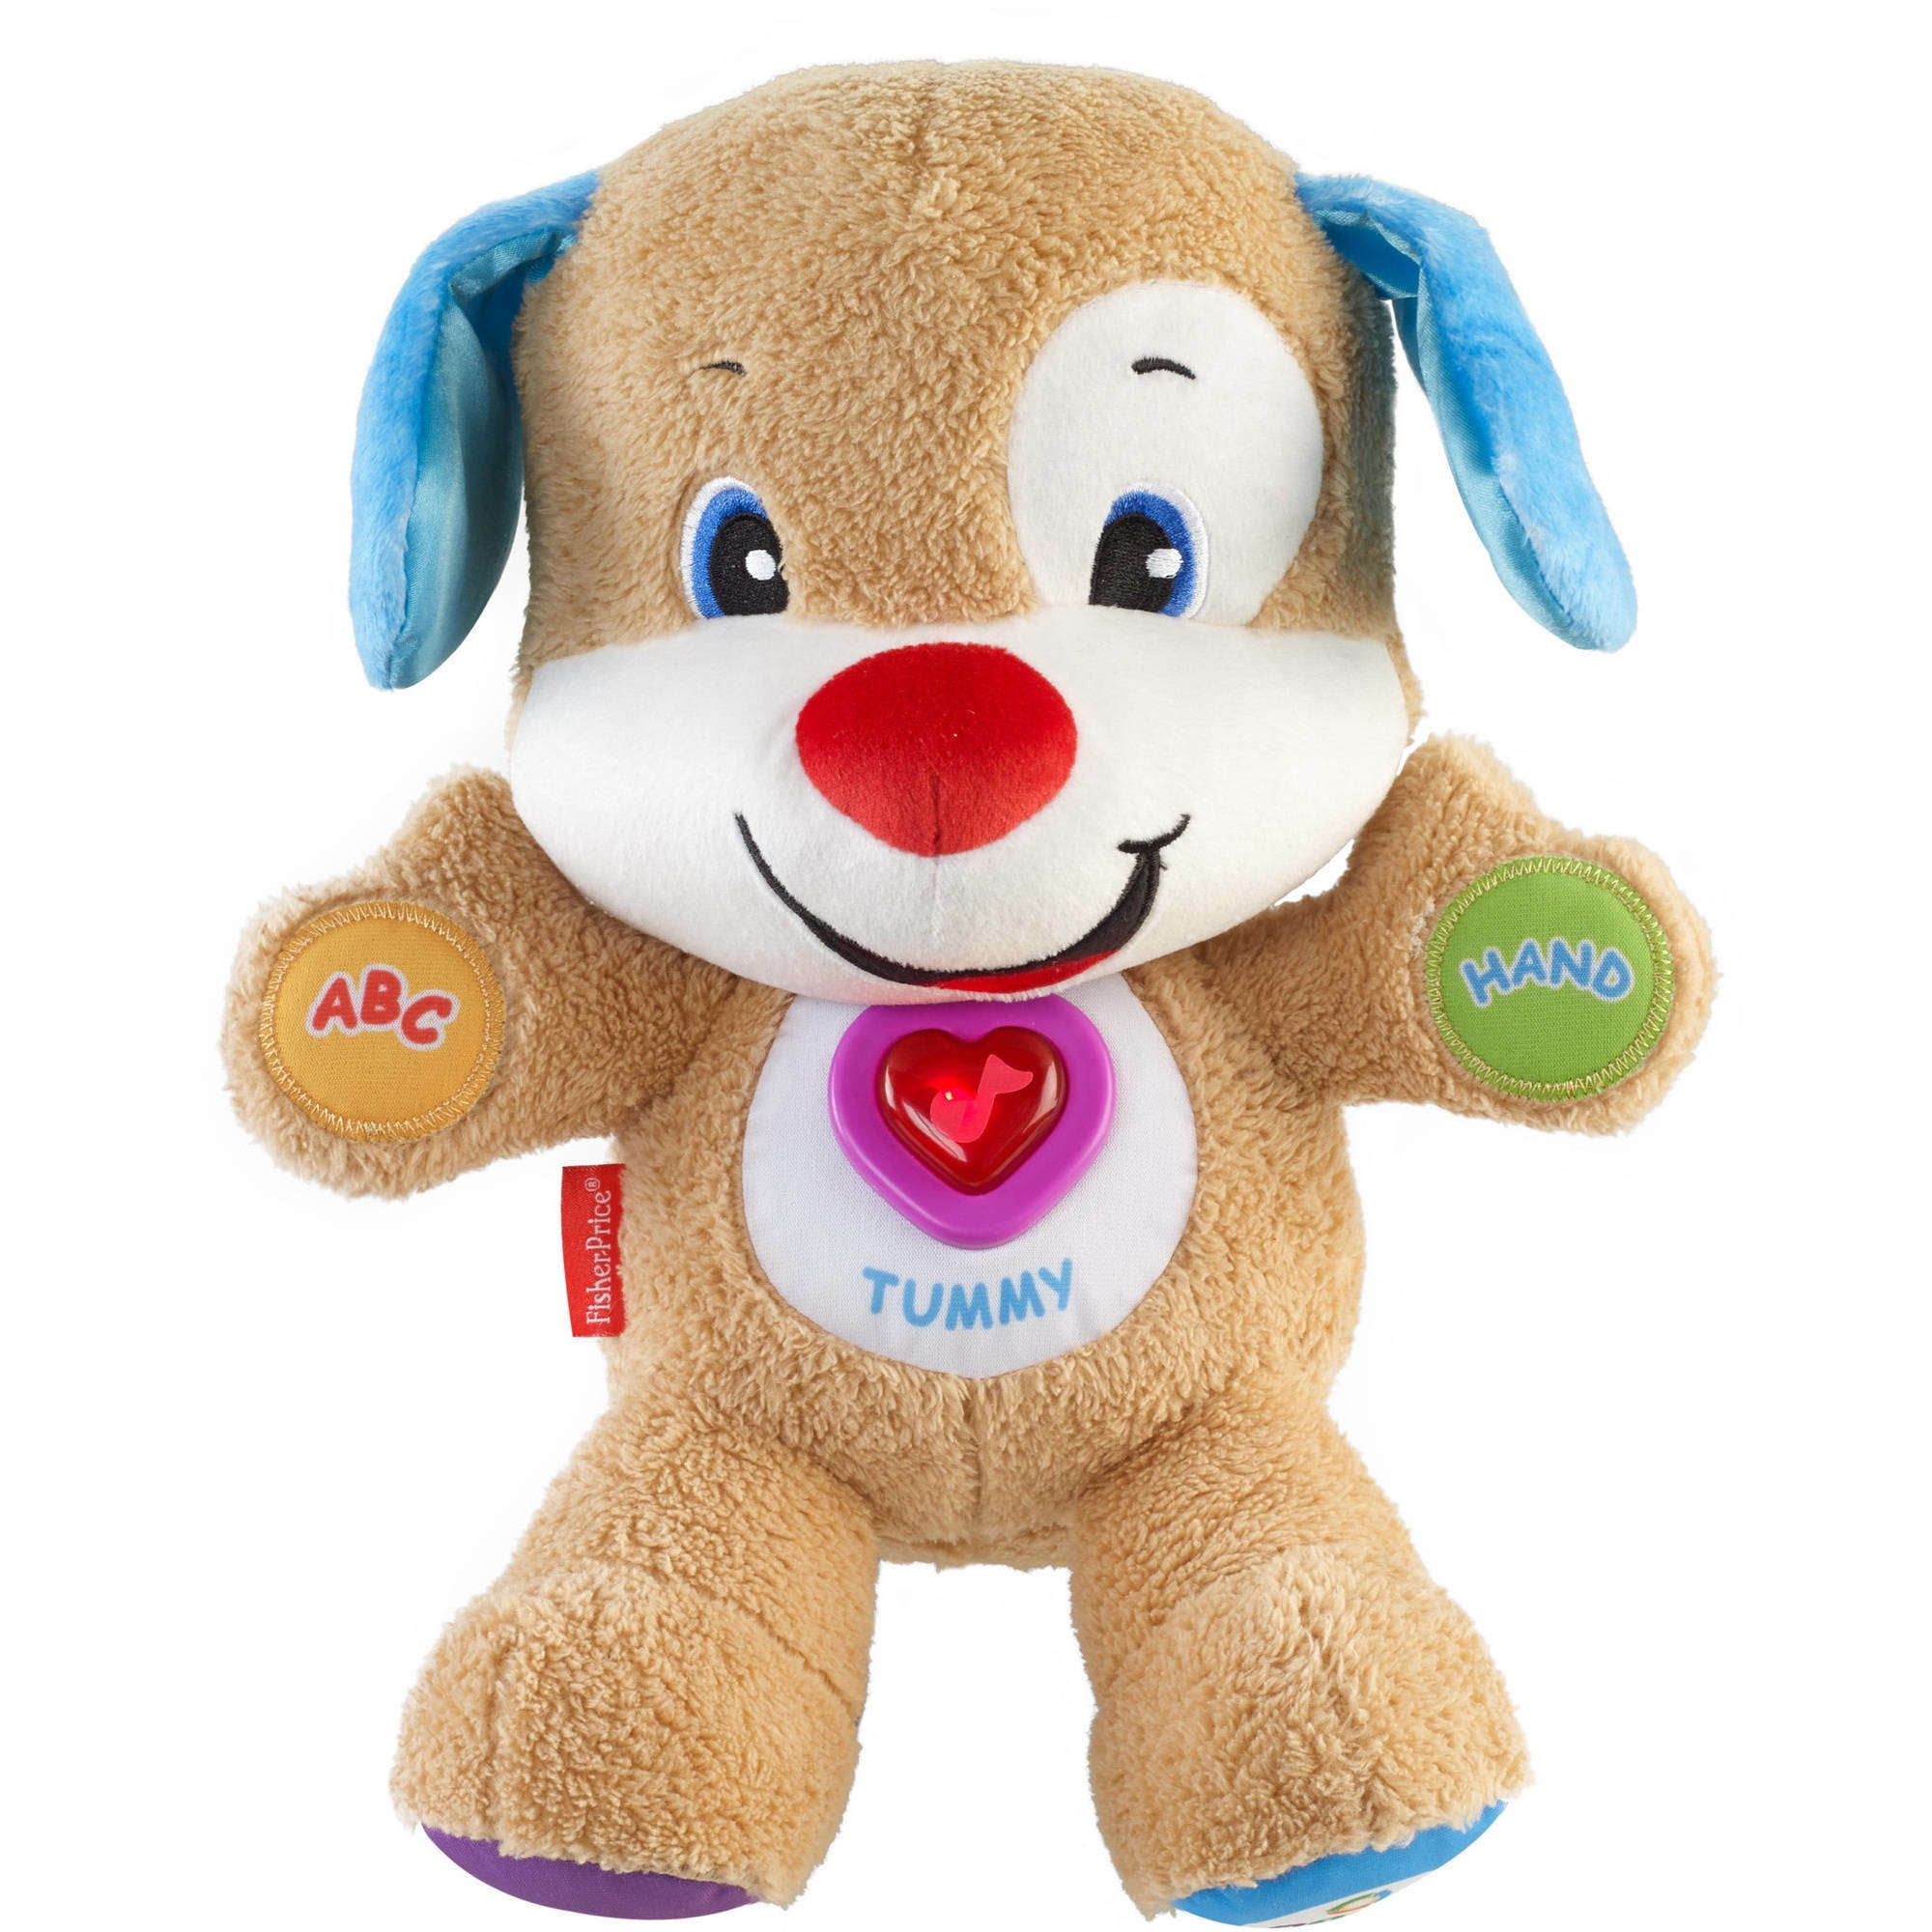 fisher price puppy show